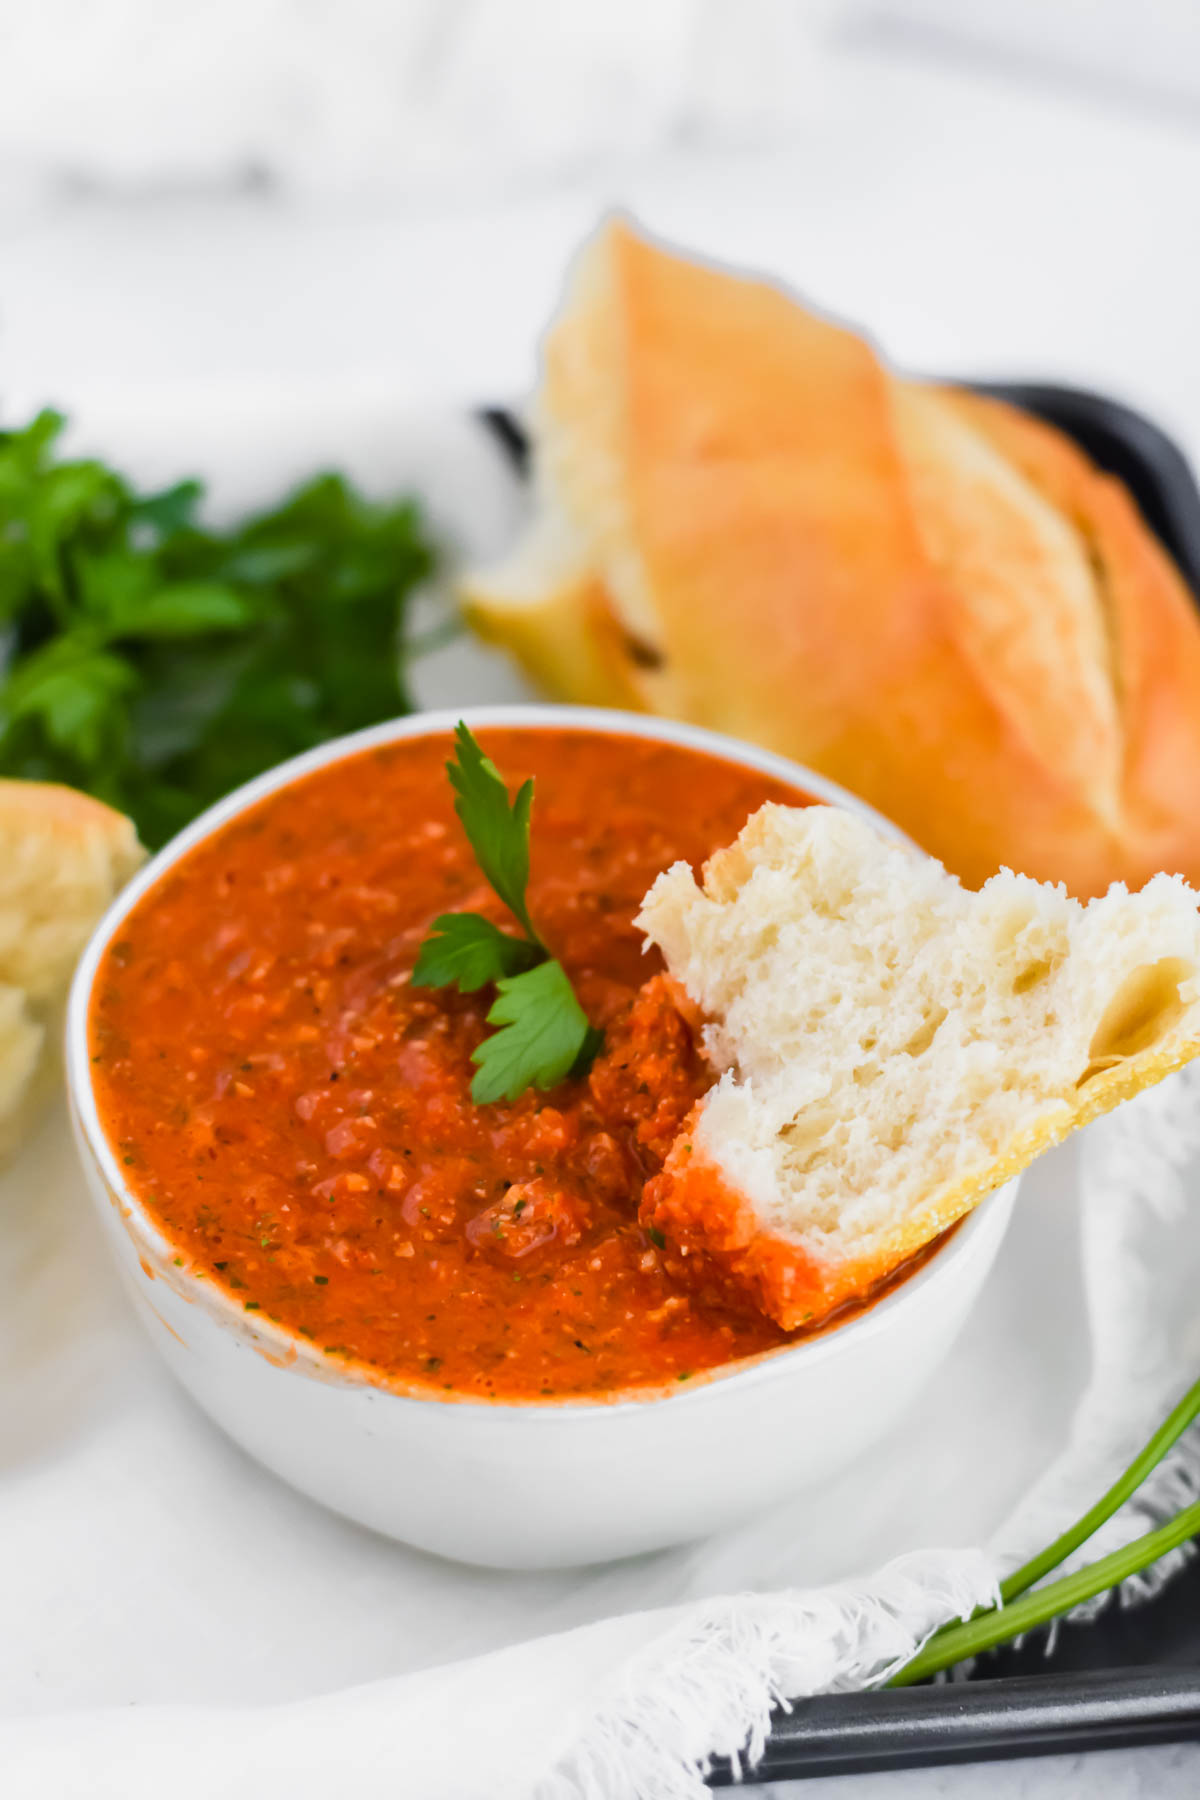 close up image of romesco dip bowl with piece of bread dunked into it.